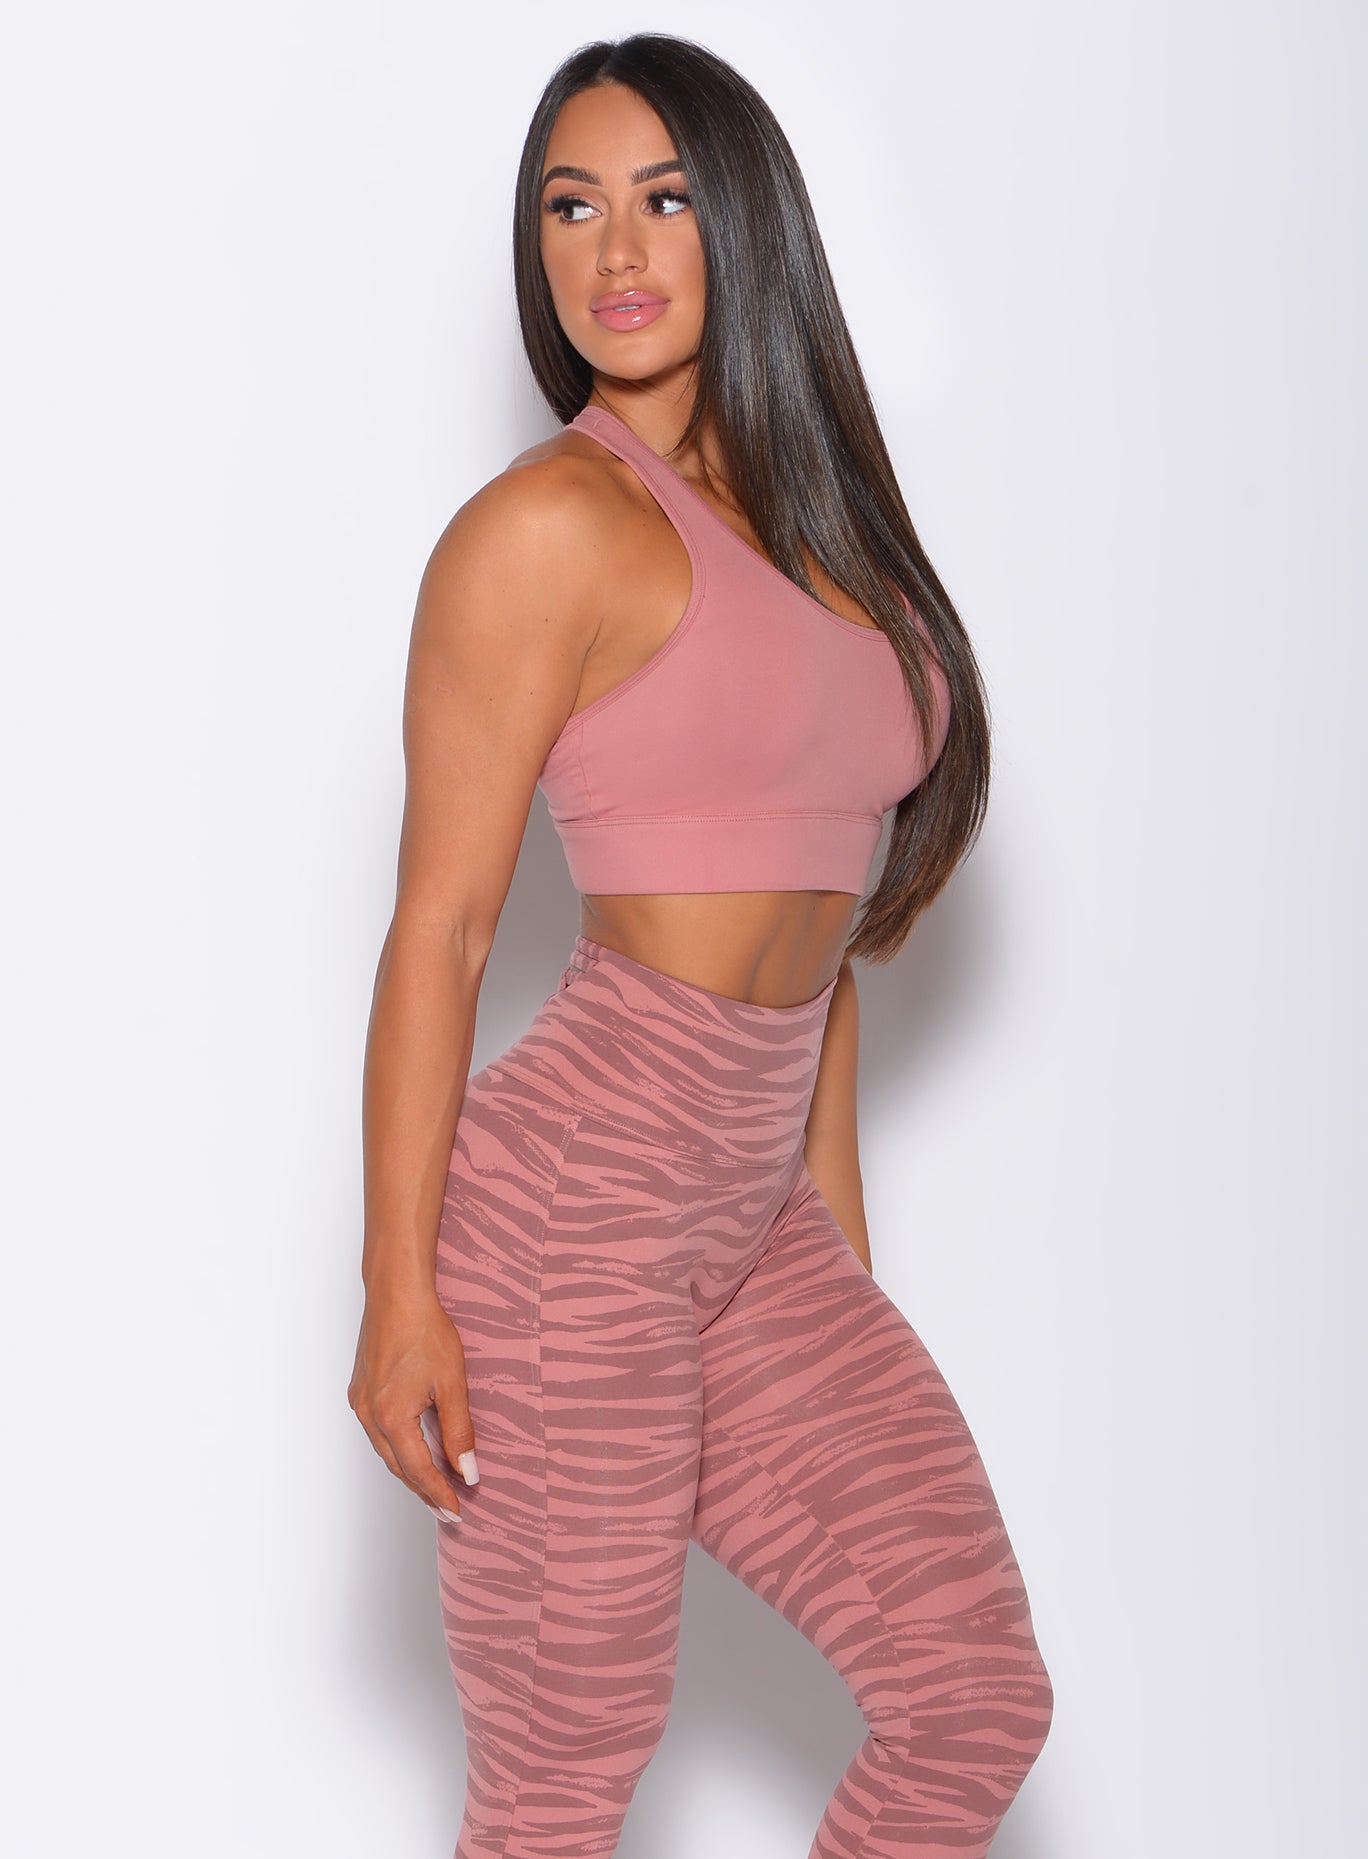 Right side profile view of a model in our rival sports bra in solid blush color and a matching tiger print leggings